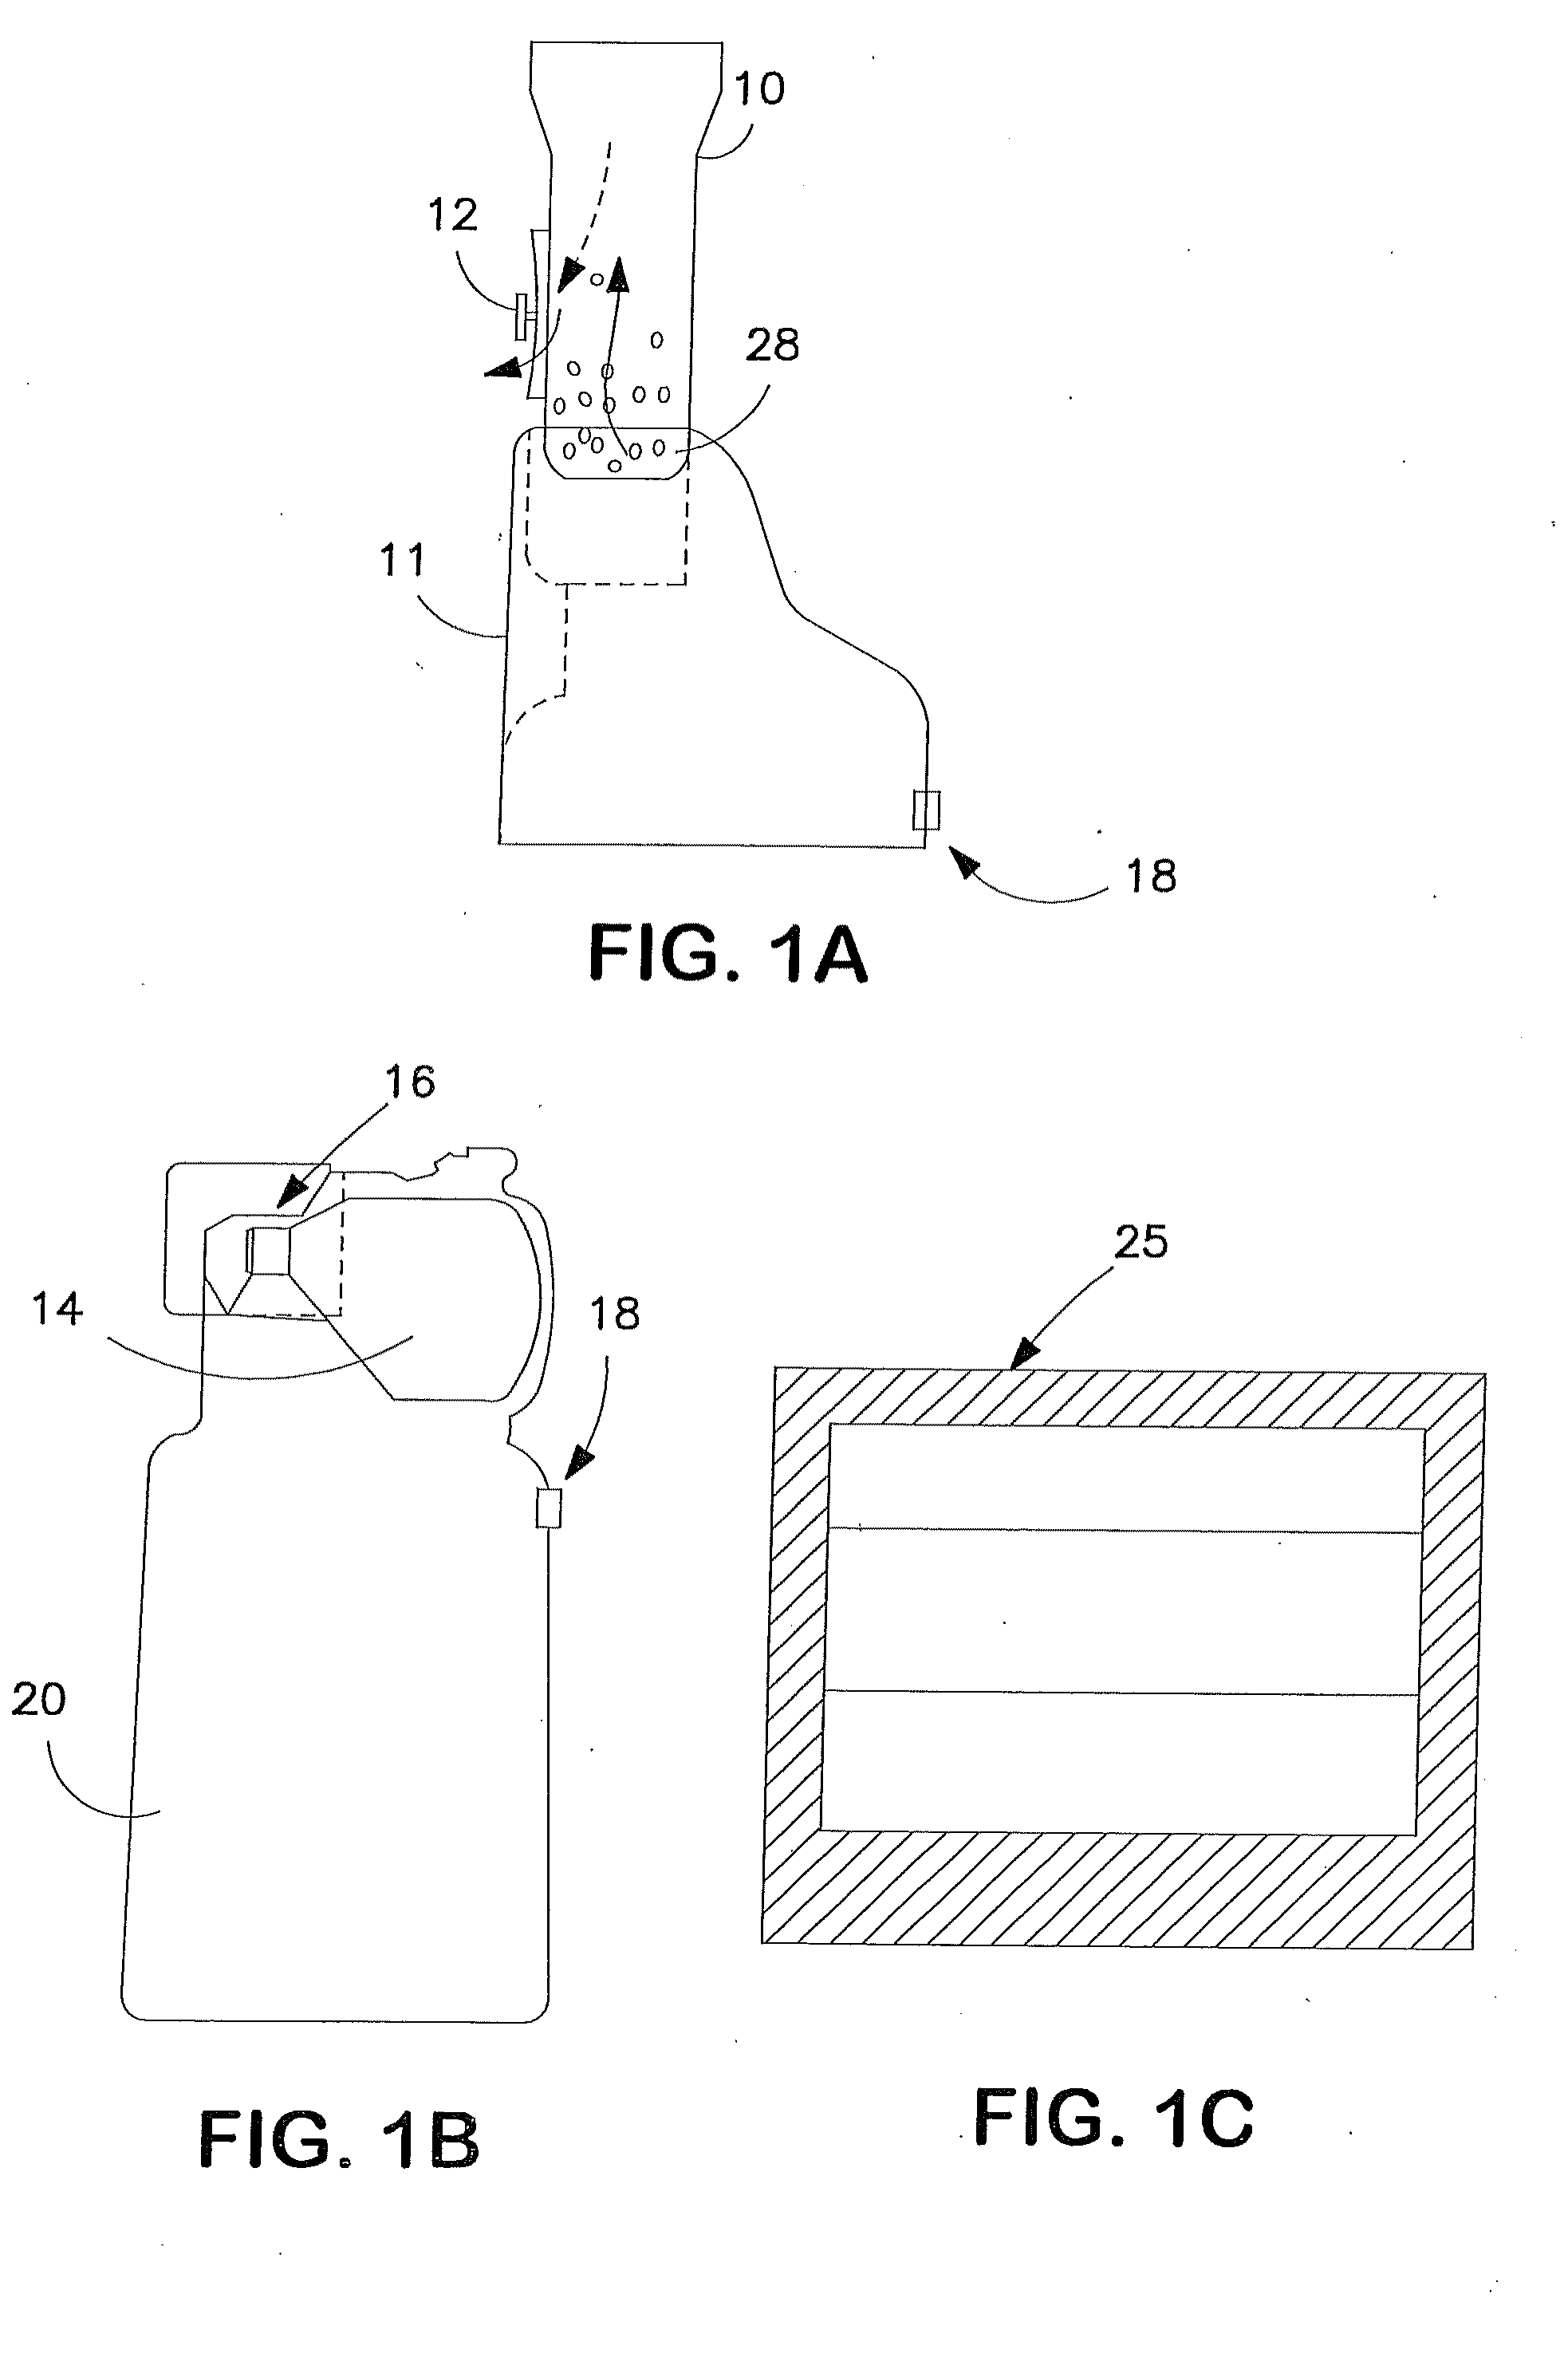 Devices for Measuring Inspiratory Airflow